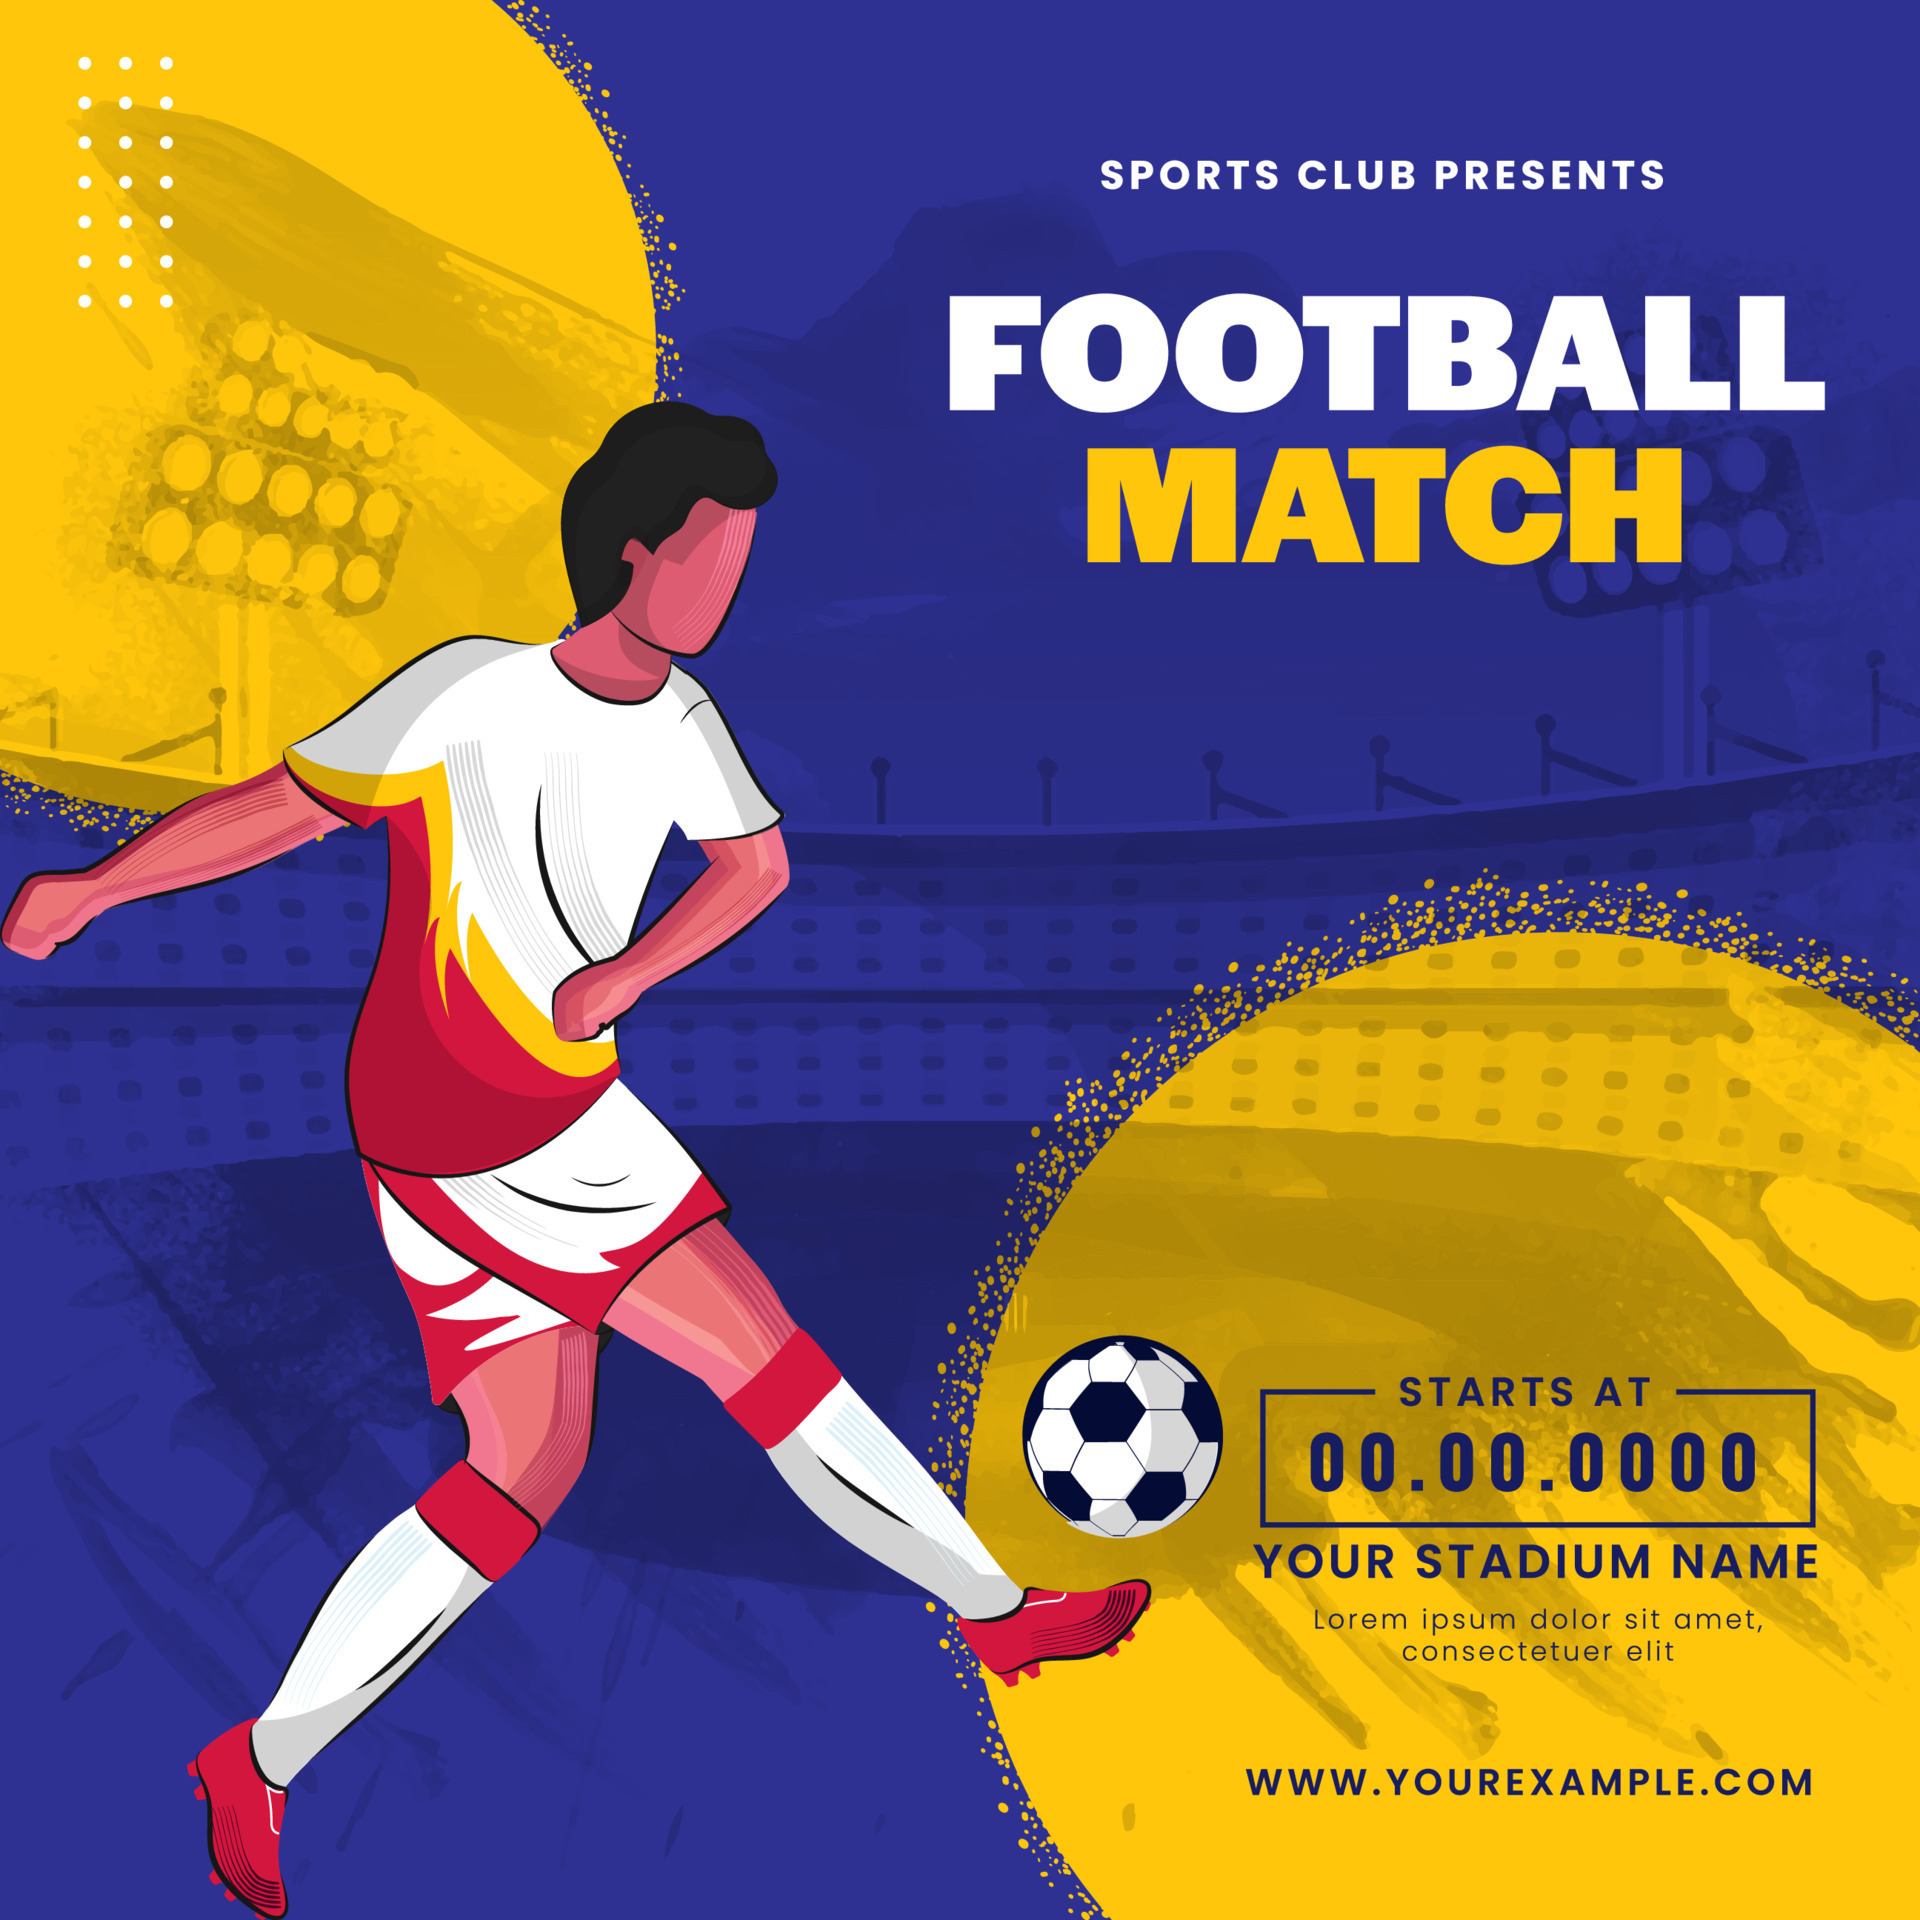 https://static.vecteezy.com/system/resources/previews/023/321/998/original/football-match-poster-design-with-faceless-footballer-player-kicking-ball-on-yellow-and-blue-stadium-background-vector.jpg